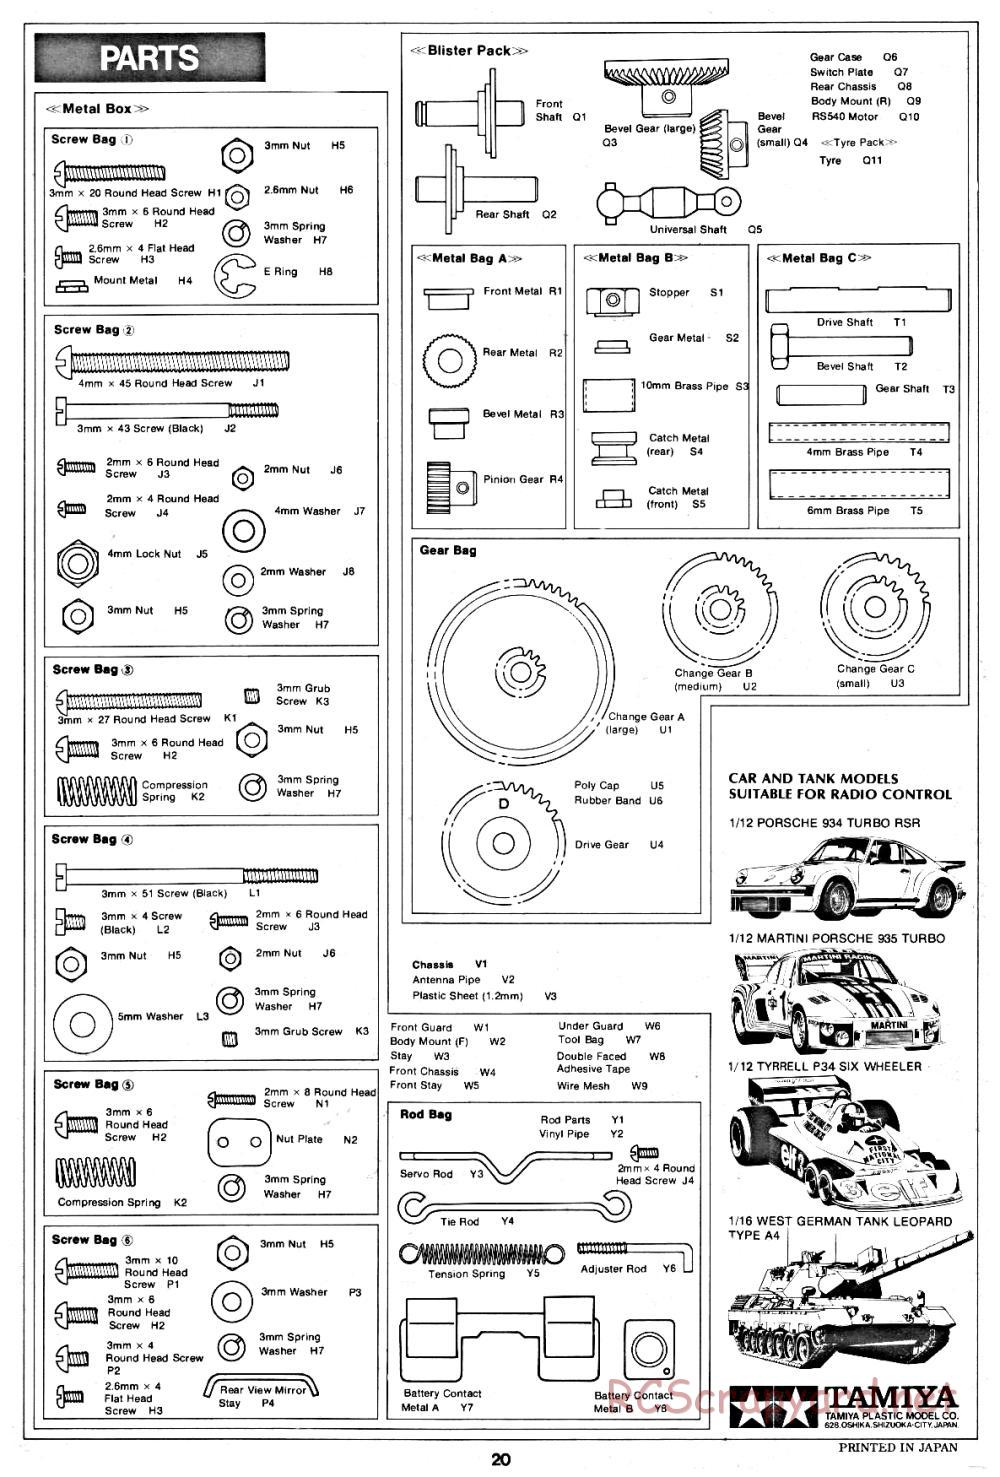 Tamiya - XR311 Combat Support Vehicle (1977) Chassis - Manual - Page 20